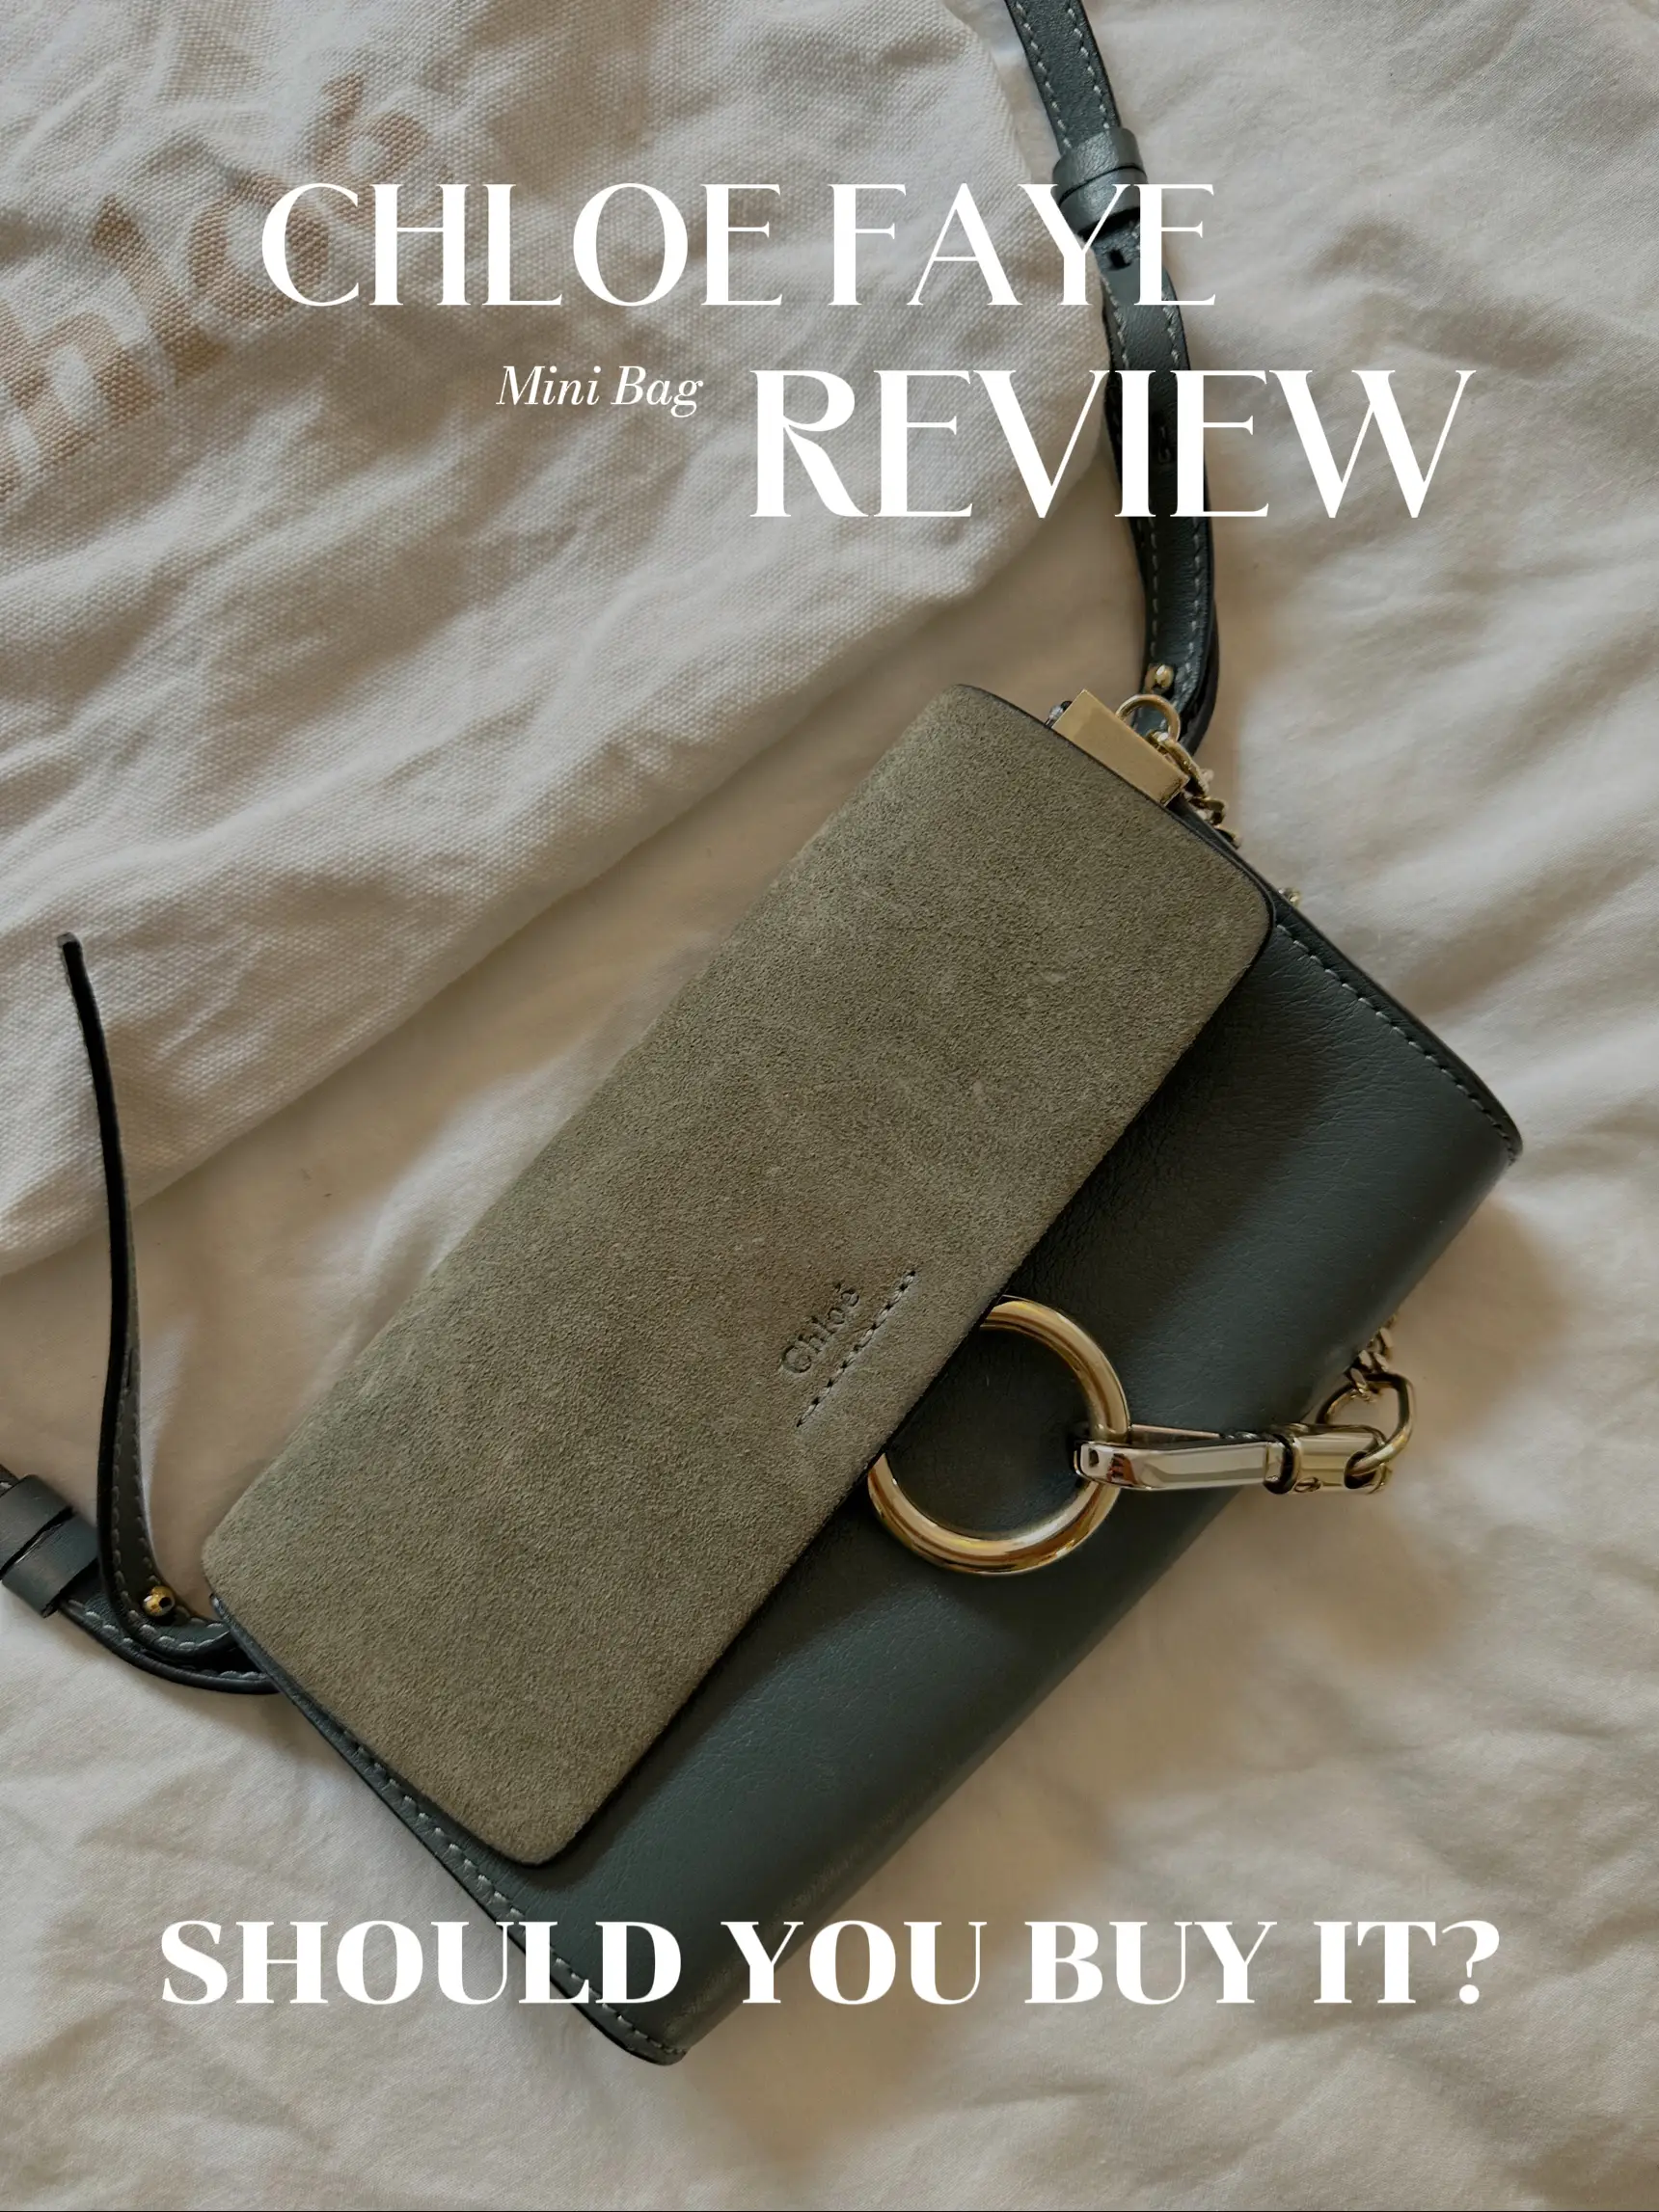 ONE YEAR LATER, Chloe Faye Review, Preowned